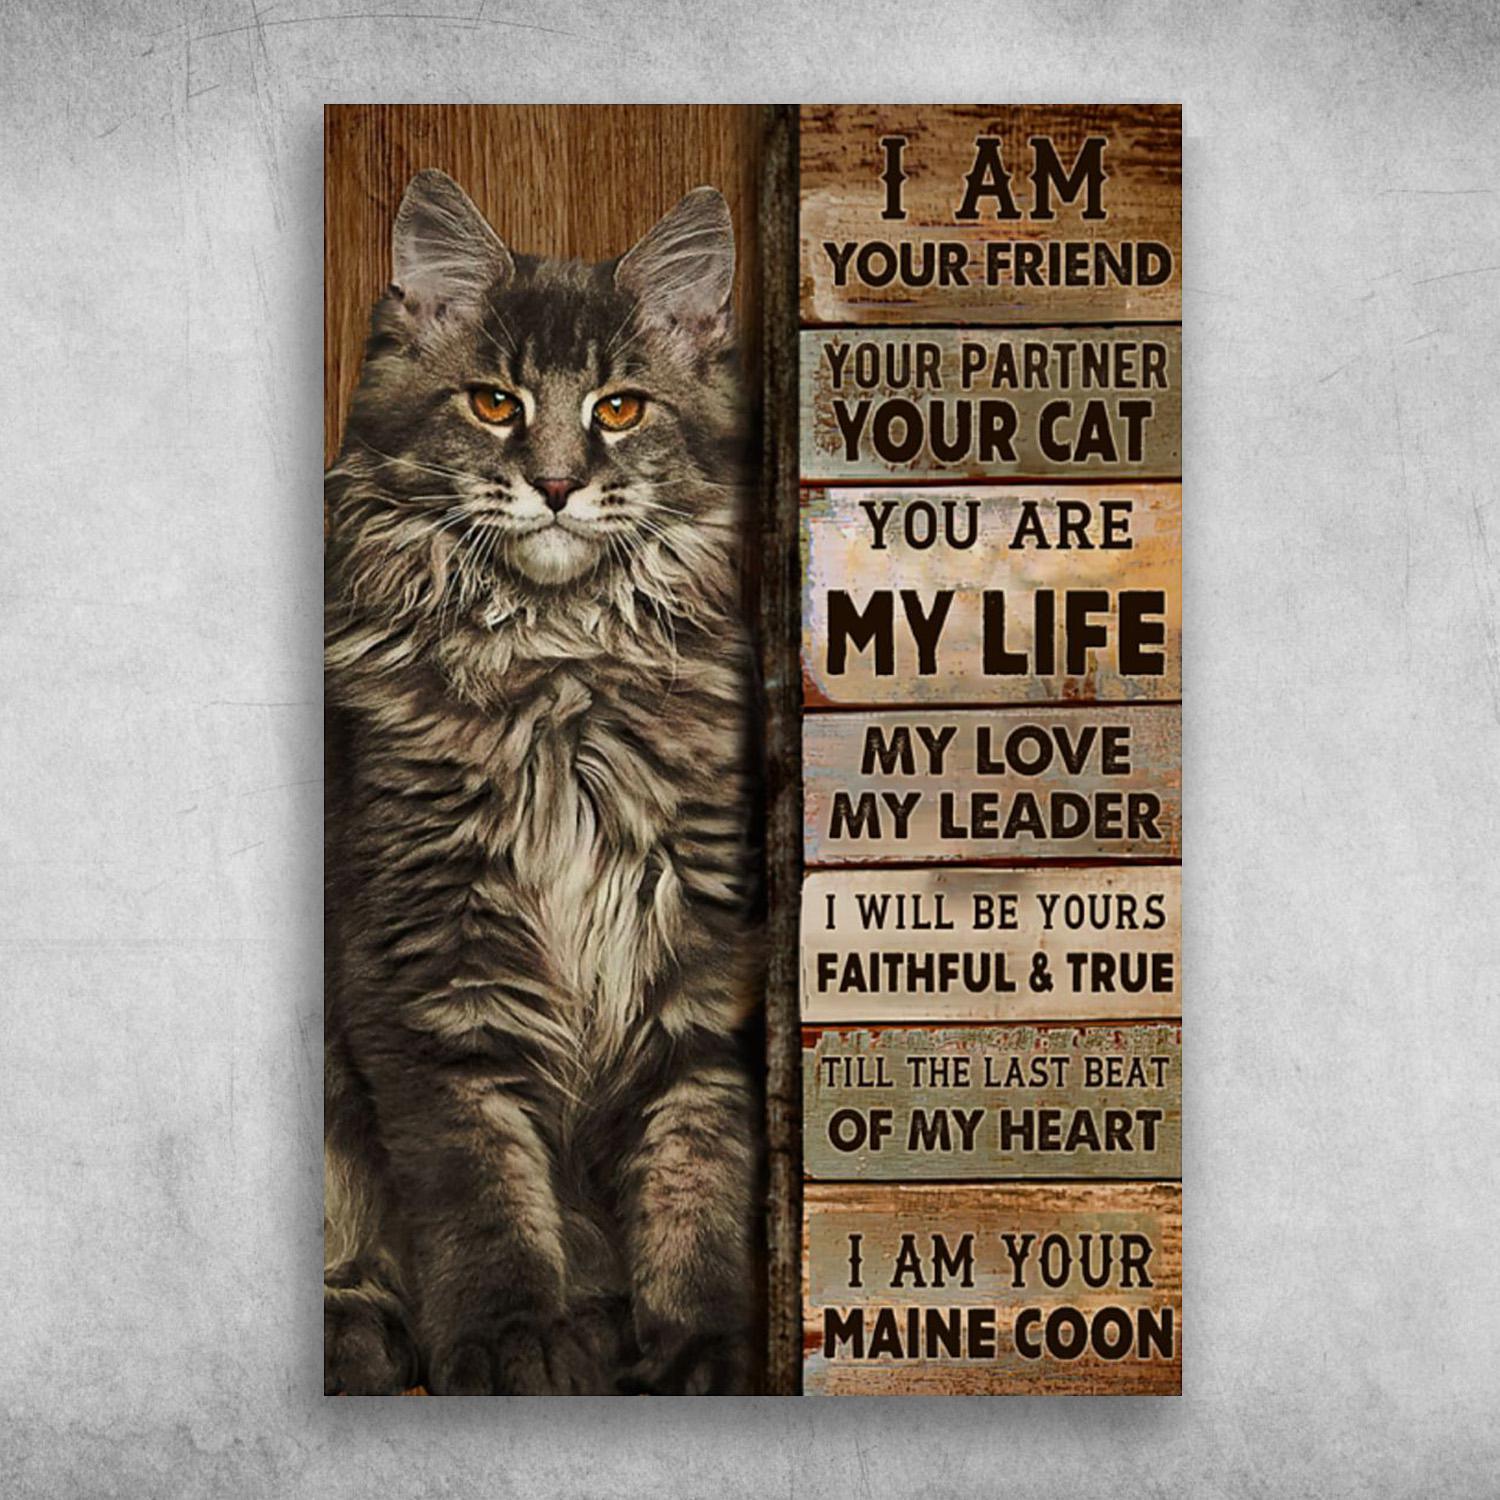 Maine Coon Cat Portrait Canvas For Son - I Am Your Friend, You Are My Life My Love My Leader, Perfect Gift For Maine Coon Lover, Cat Lover - Amzanimalsgift